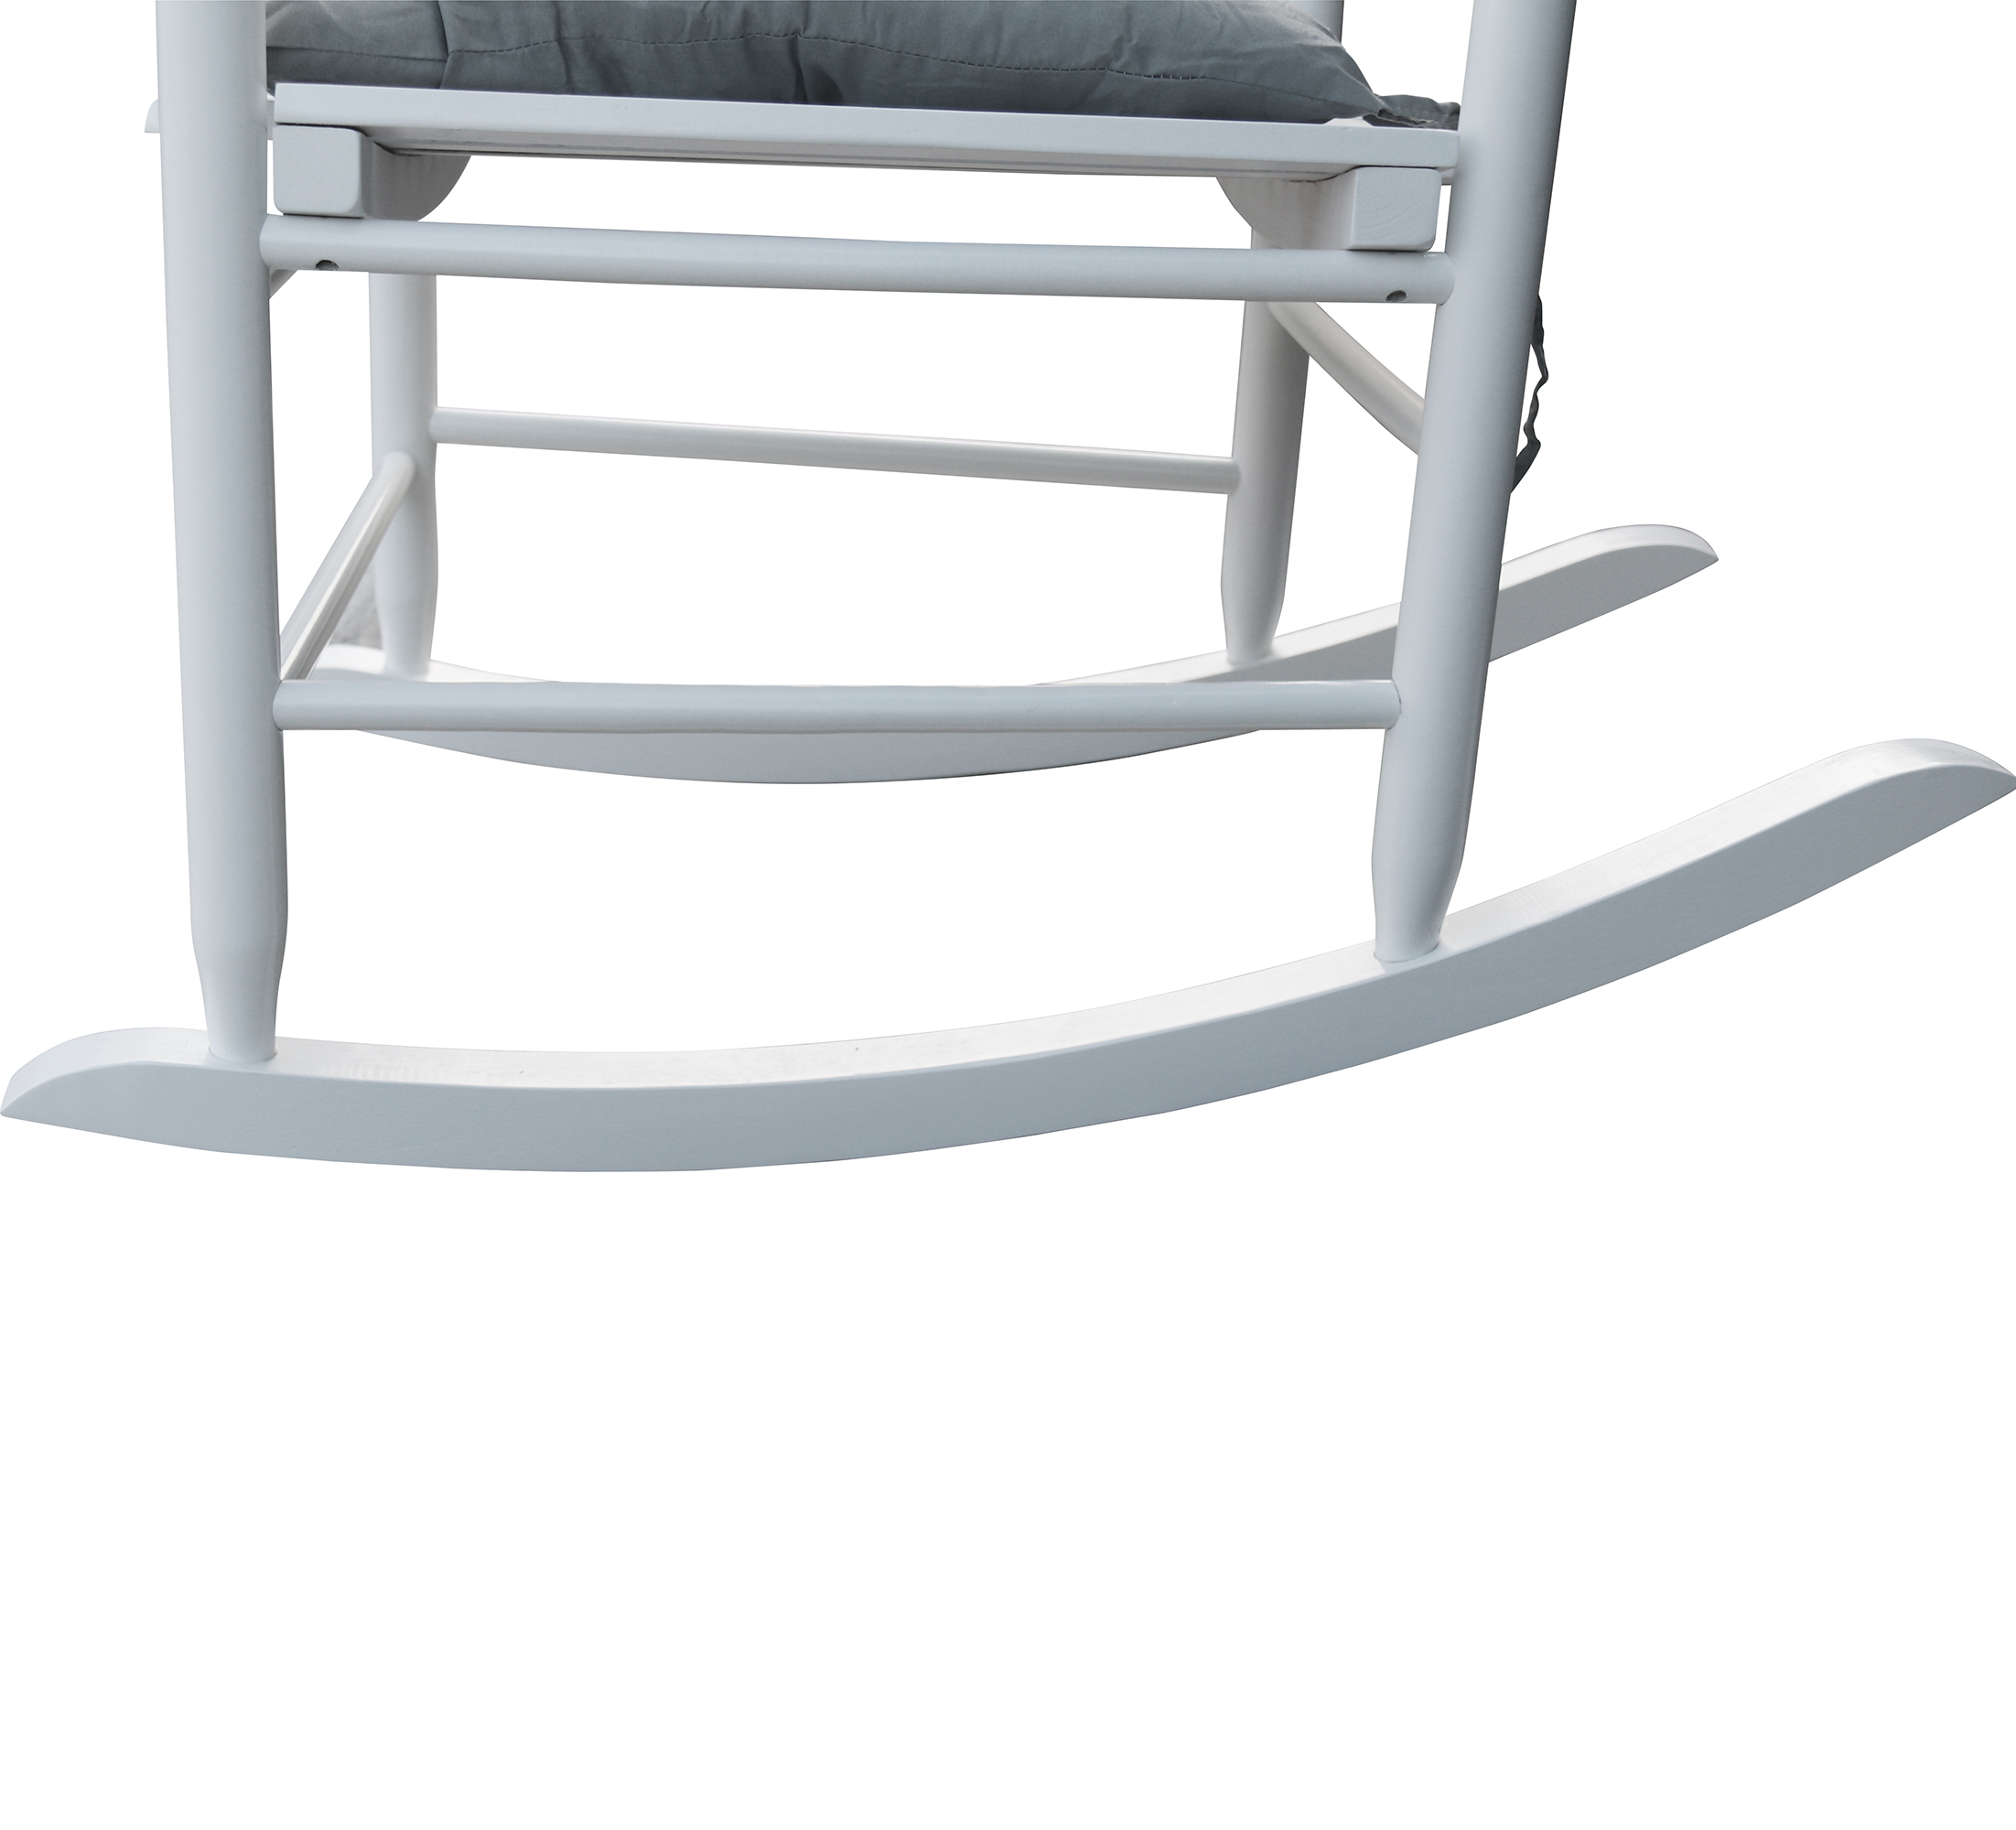 Outdoor Rocking Chair, Wood Rocker Chair for Porch Garden Patio, White24.5" L x 32.85" W x 45.3" H - image 4 of 7